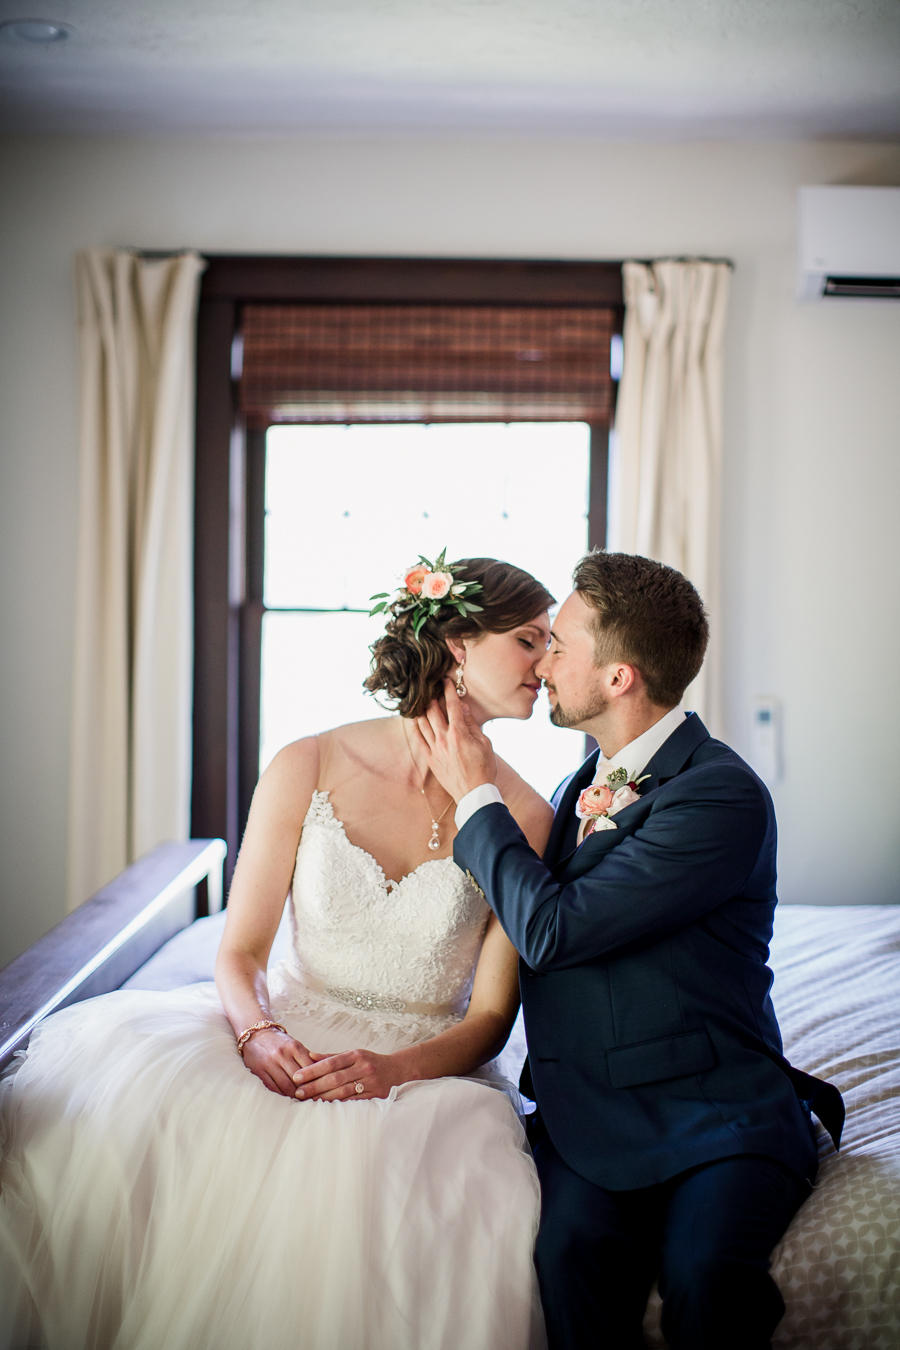 Bride and Groom kissing on bed at this North Carolina Elopement by Knoxville Wedding Photographer, Amanda May Photos.